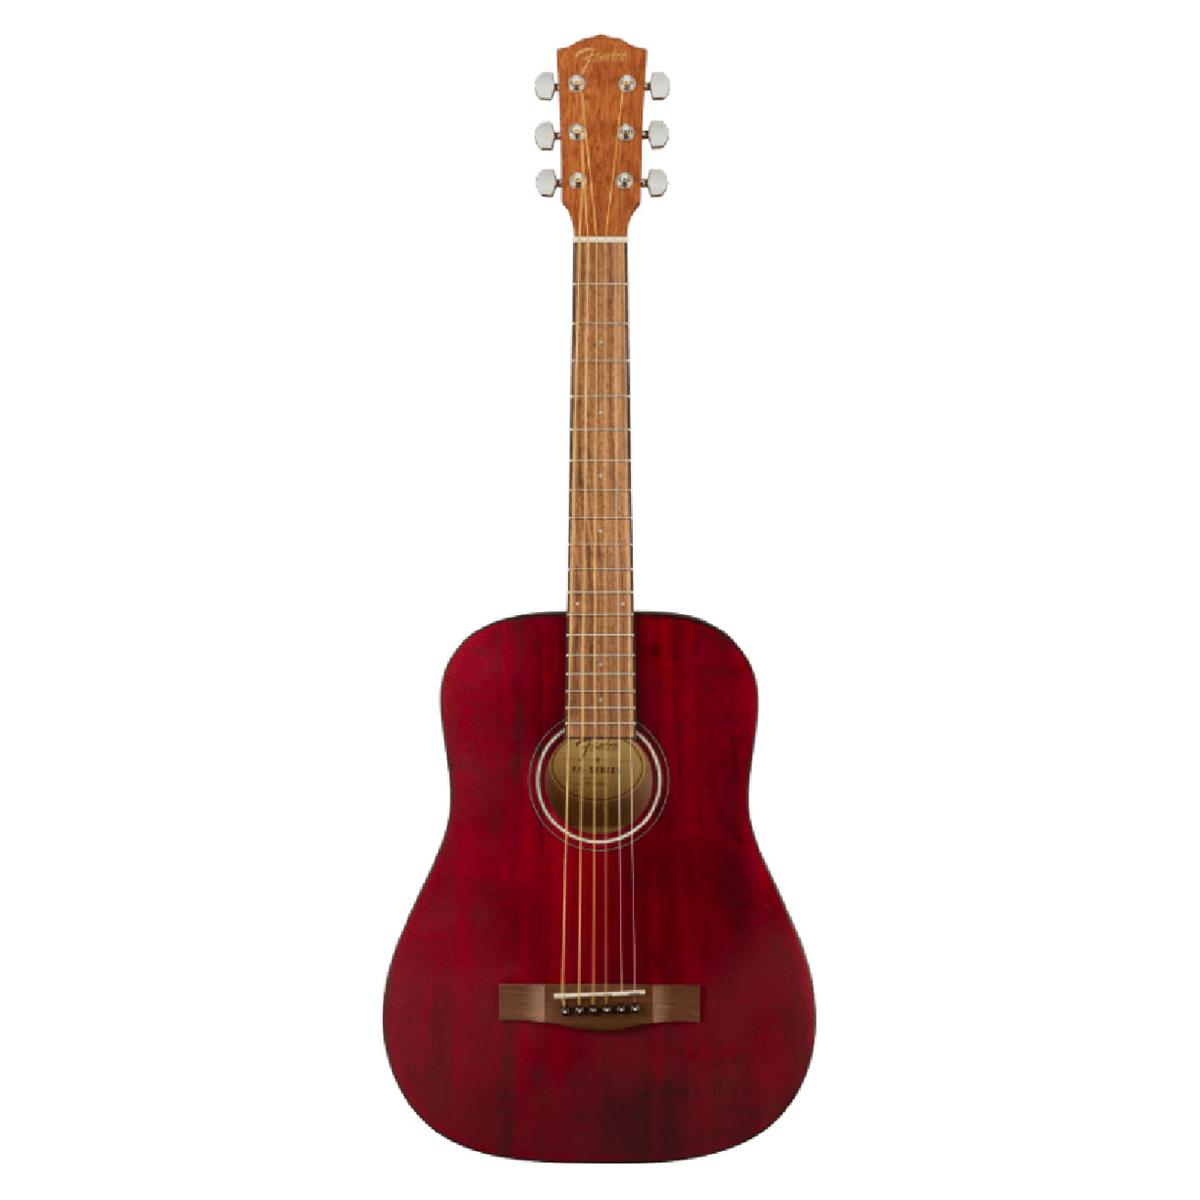 Fender FA-15 3/4 Scale Steel String Acoustic Guitar with Gig Bag, Red -  0971170170